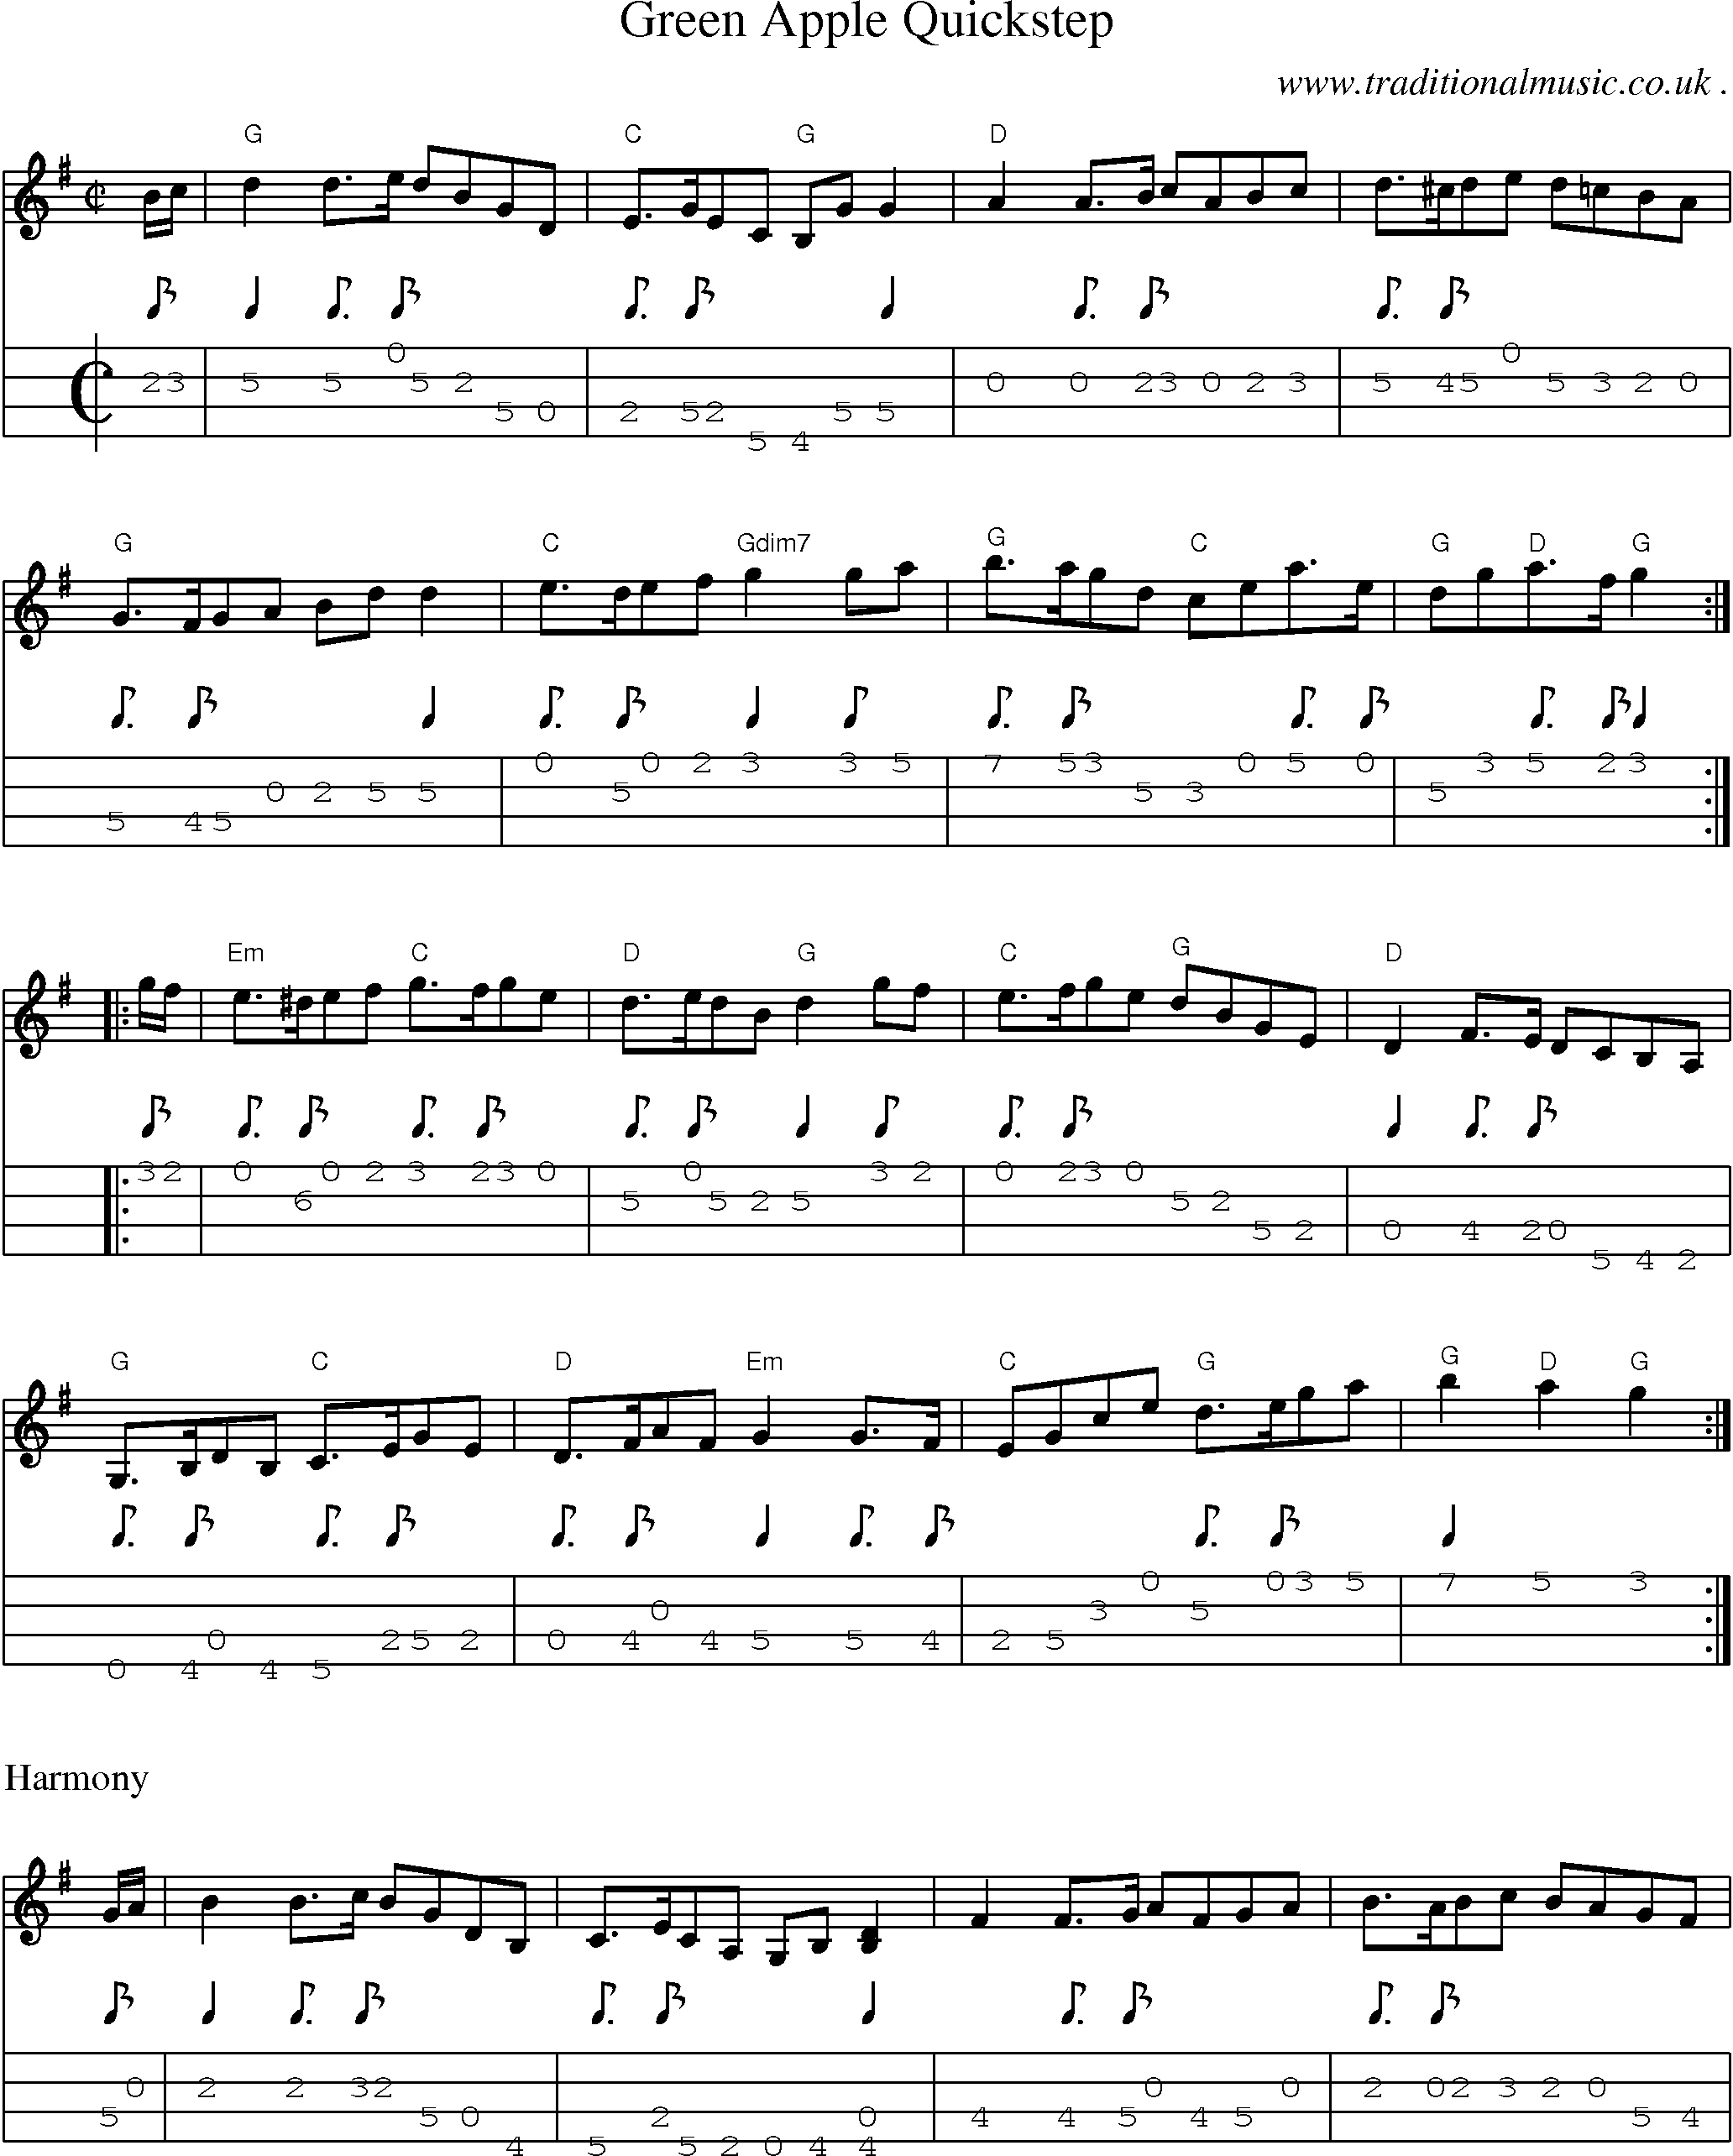 Music Score and Guitar Tabs for Green Apple Quickstep